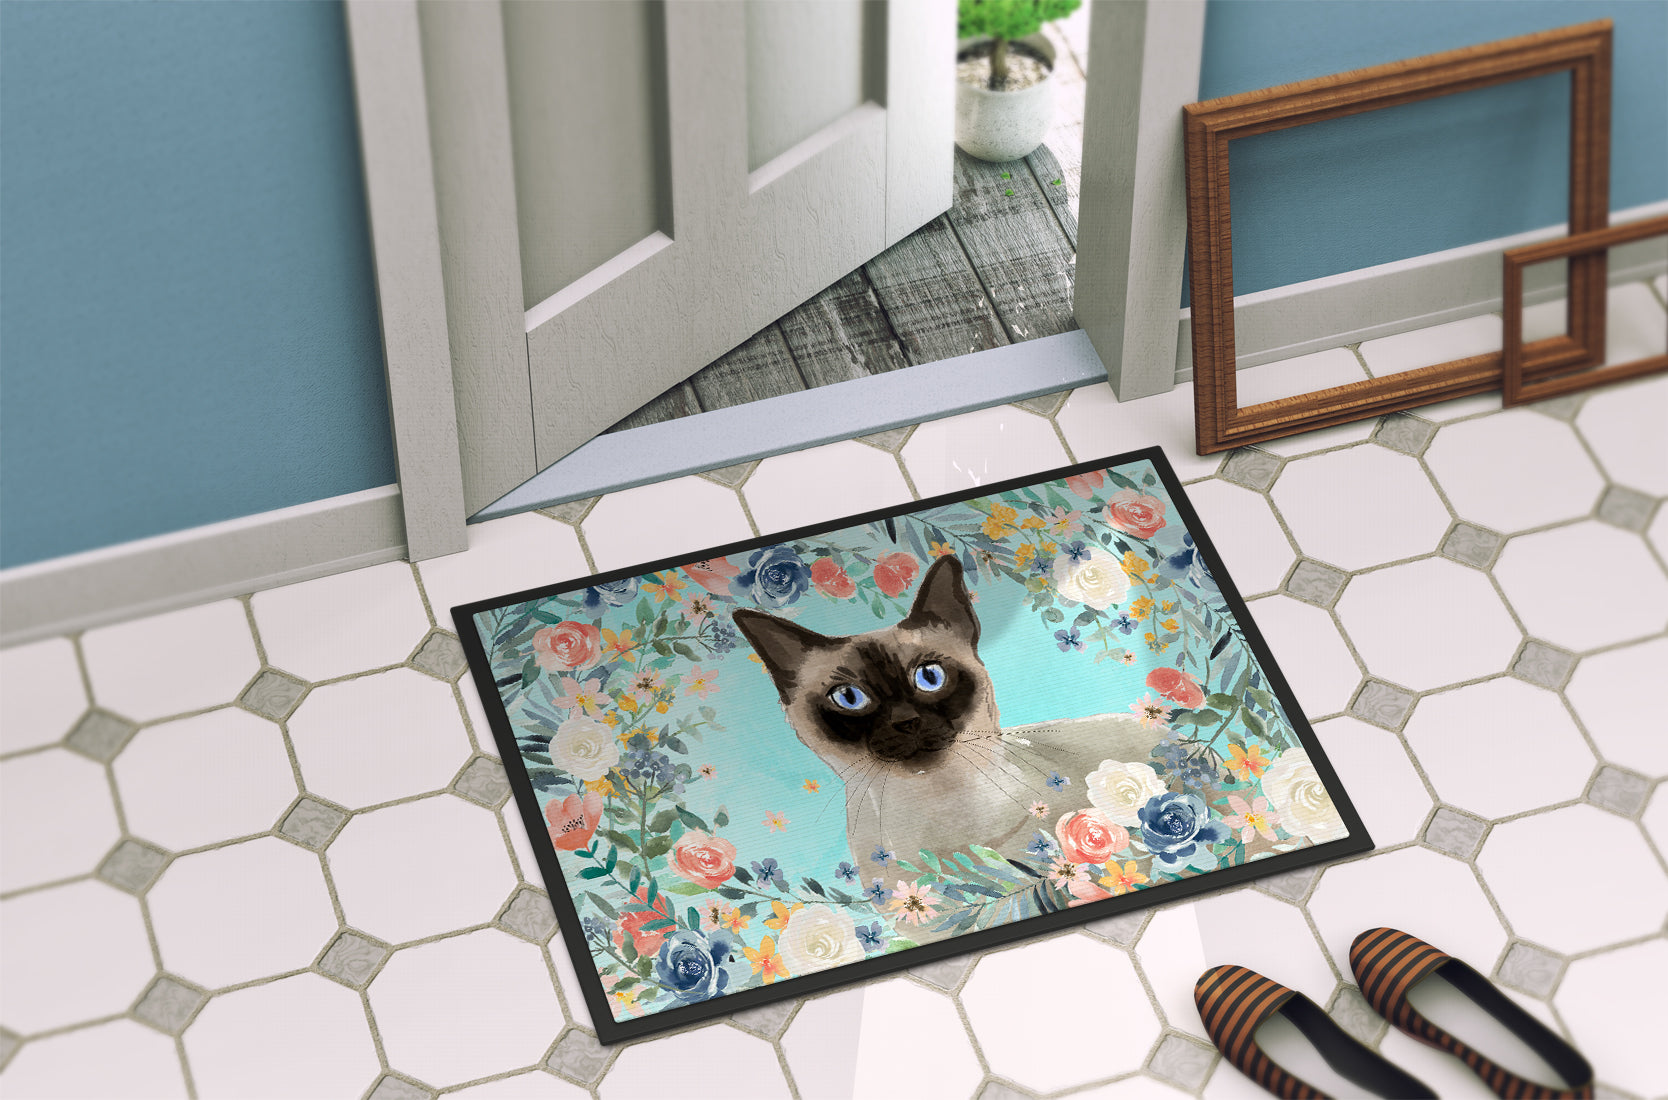 Siamese Spring Flowers Indoor or Outdoor Mat 18x27 CK3398MAT - the-store.com